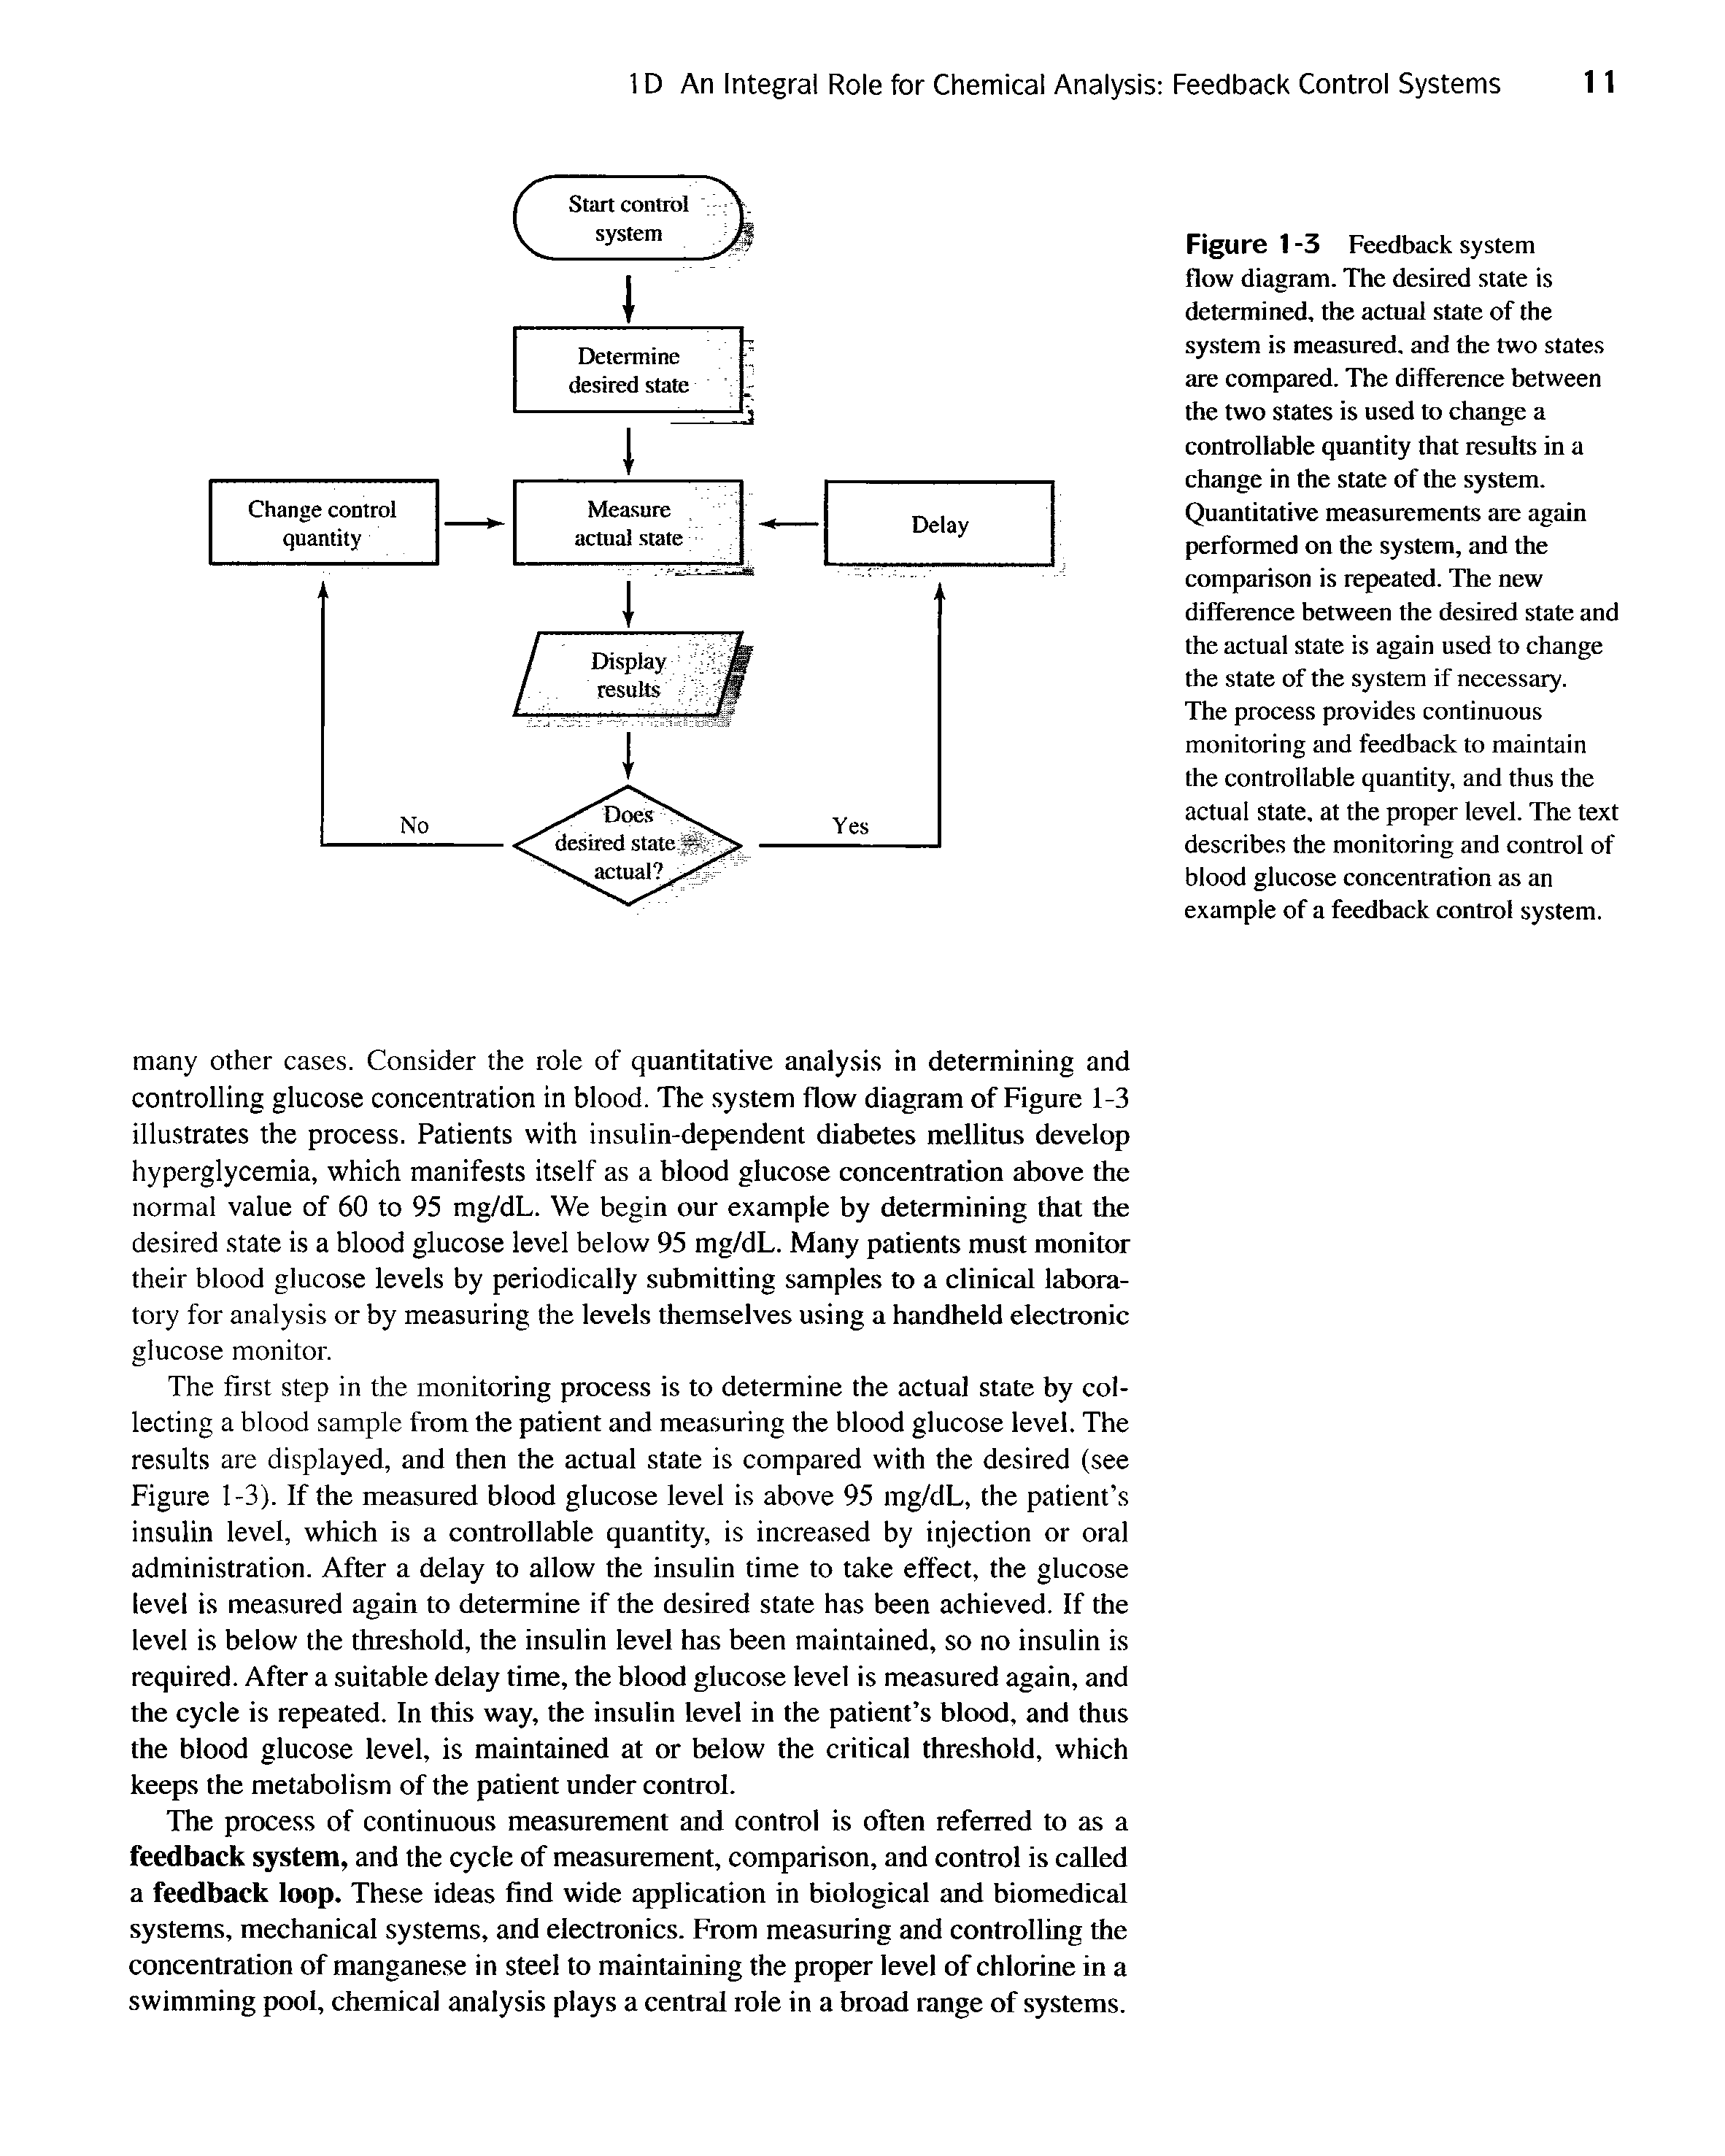 Figure 1 -3 Feedback system flow diagram. The desired state is determined, the actual state of the sy.stem is mea.sitred, and the two states are compared. The difference between the two states is used to change a controllable quantity that results in a change in the state of the system. Quantitative measurements are again performed on the system, and the comparison is repeated. The new difference between the desired state and the actual state is again used to change the state of the system if necessary.